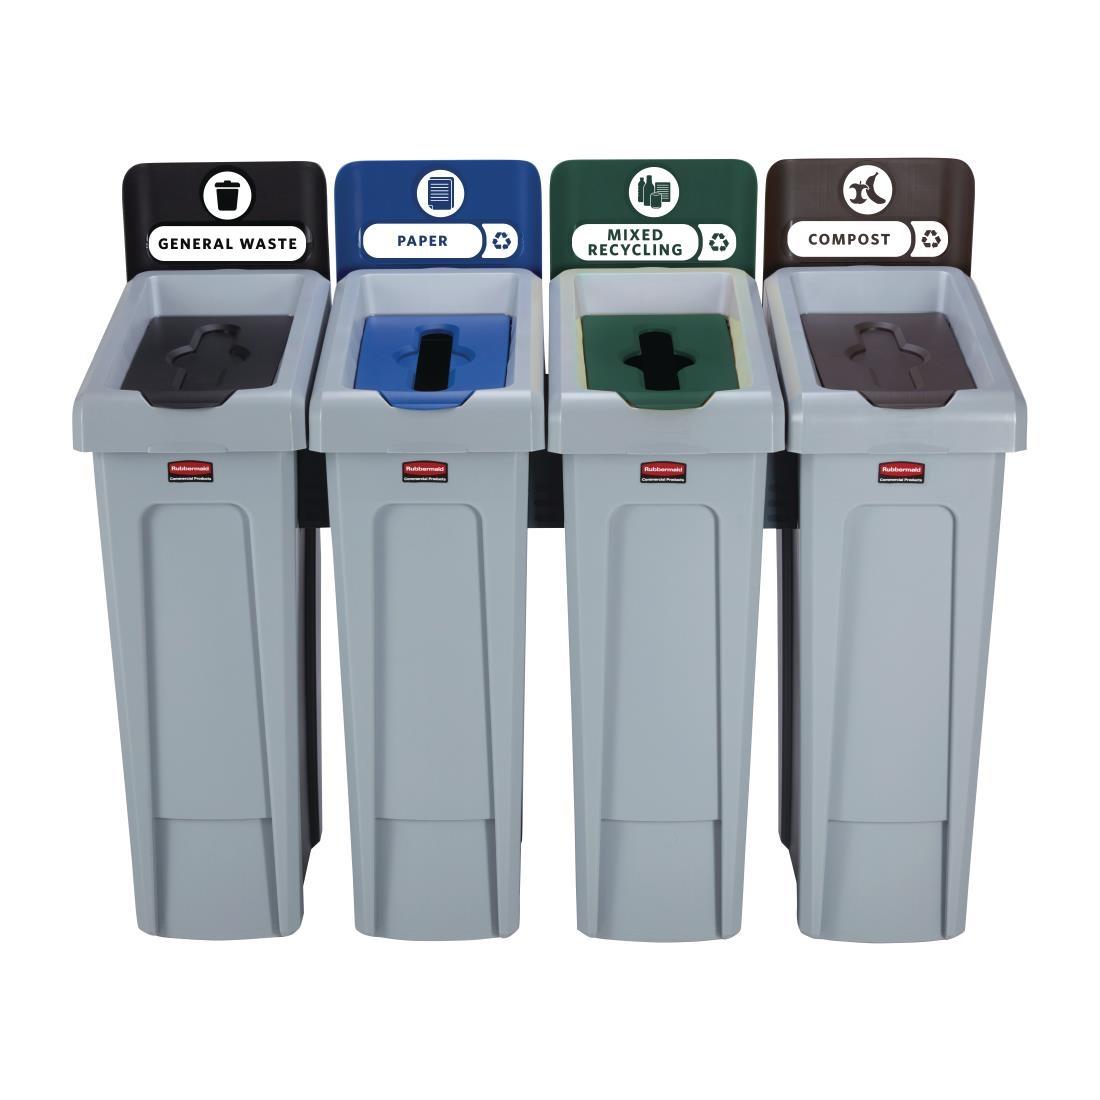 Rubbermaid Slim Jim Four Stream Recycling Station 87Ltr - DY081  - 2